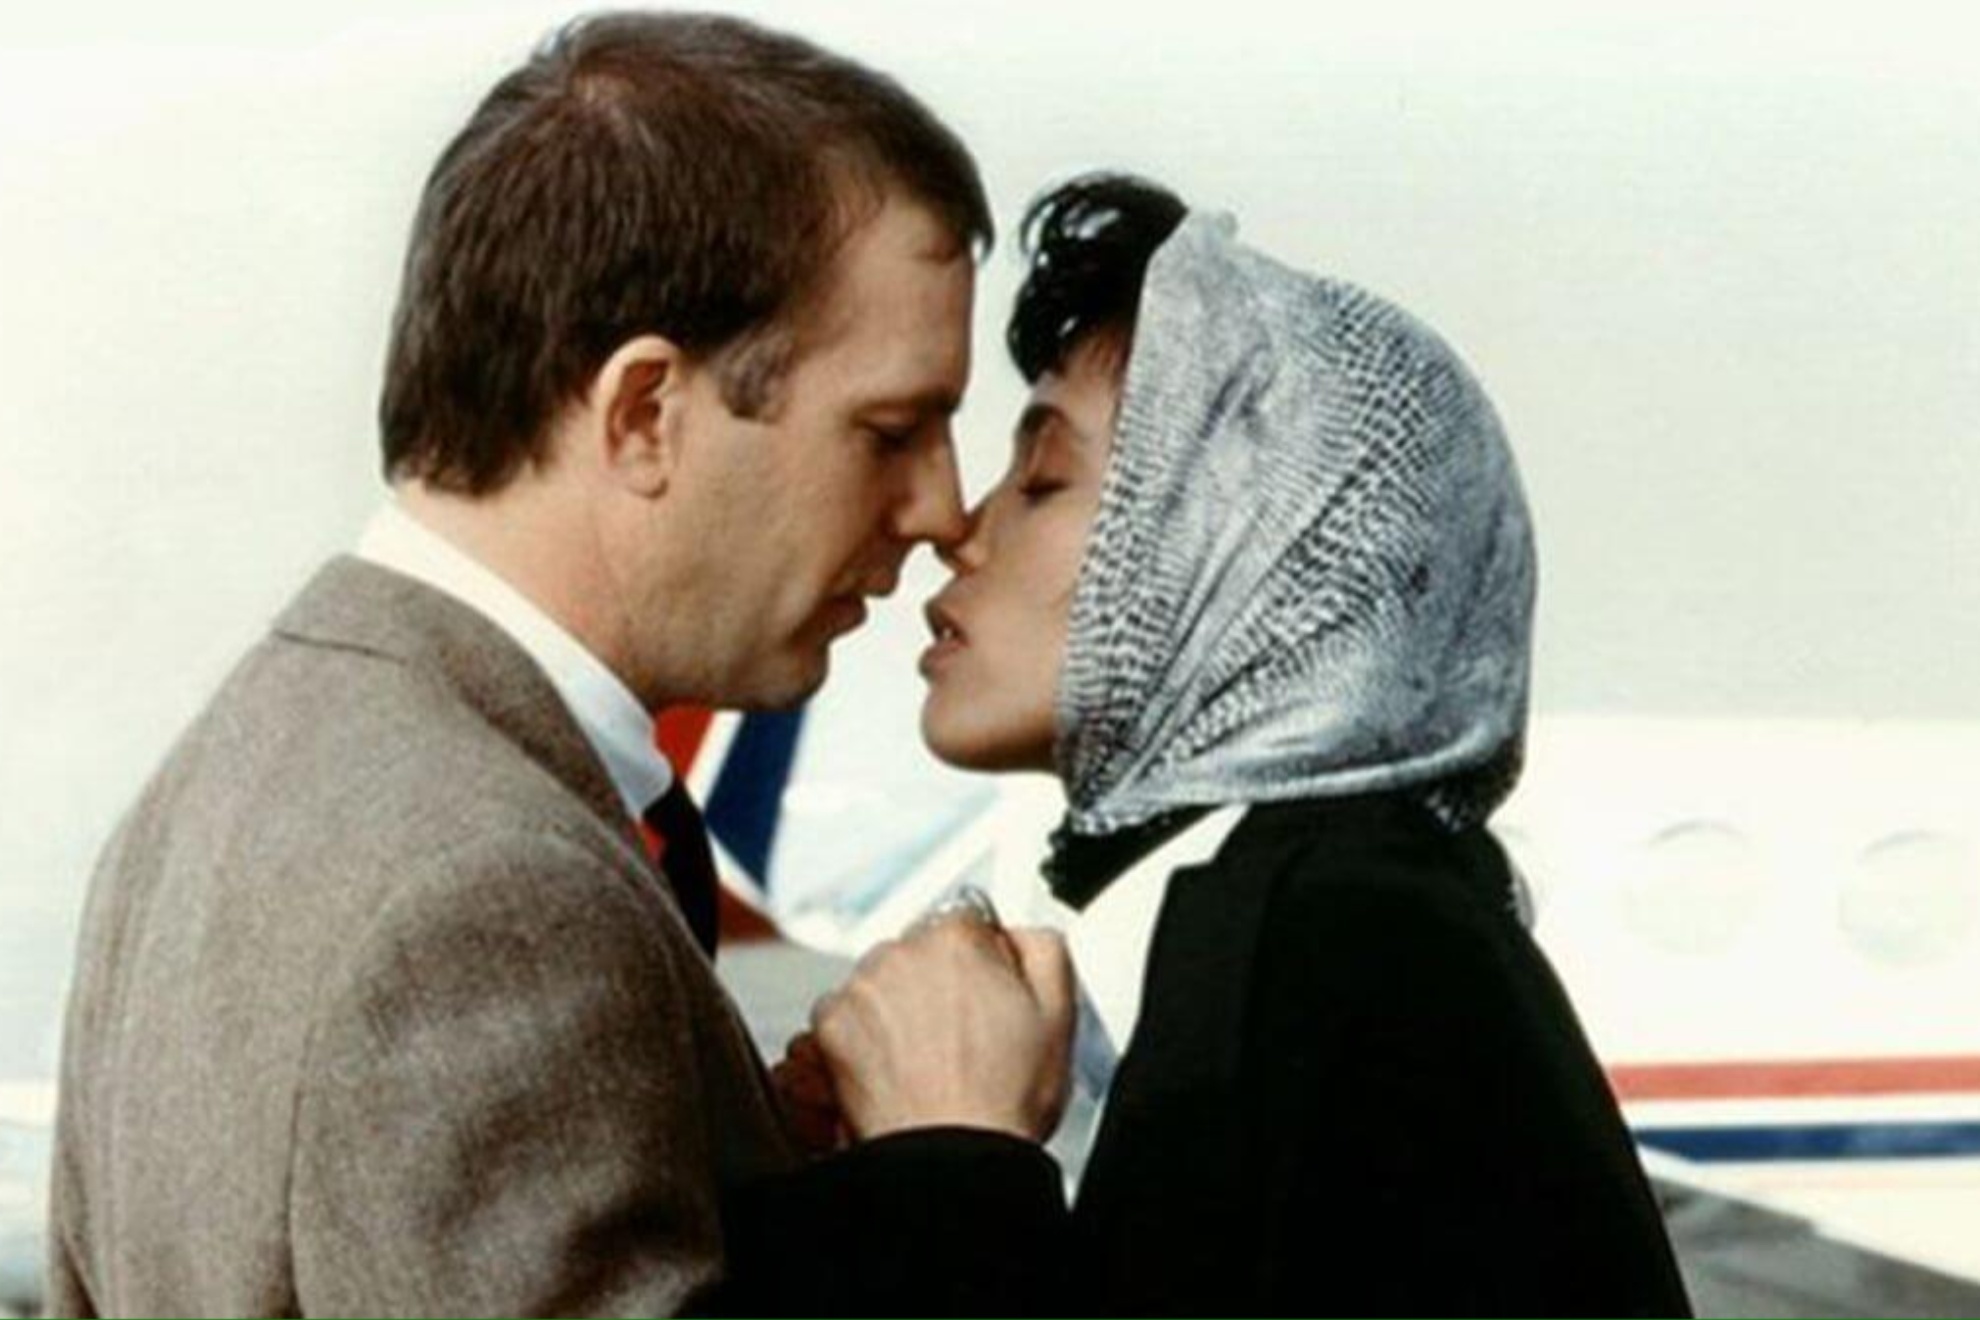 Costner and Houston starred in 1992's drama movie 'The Bodyguard'.